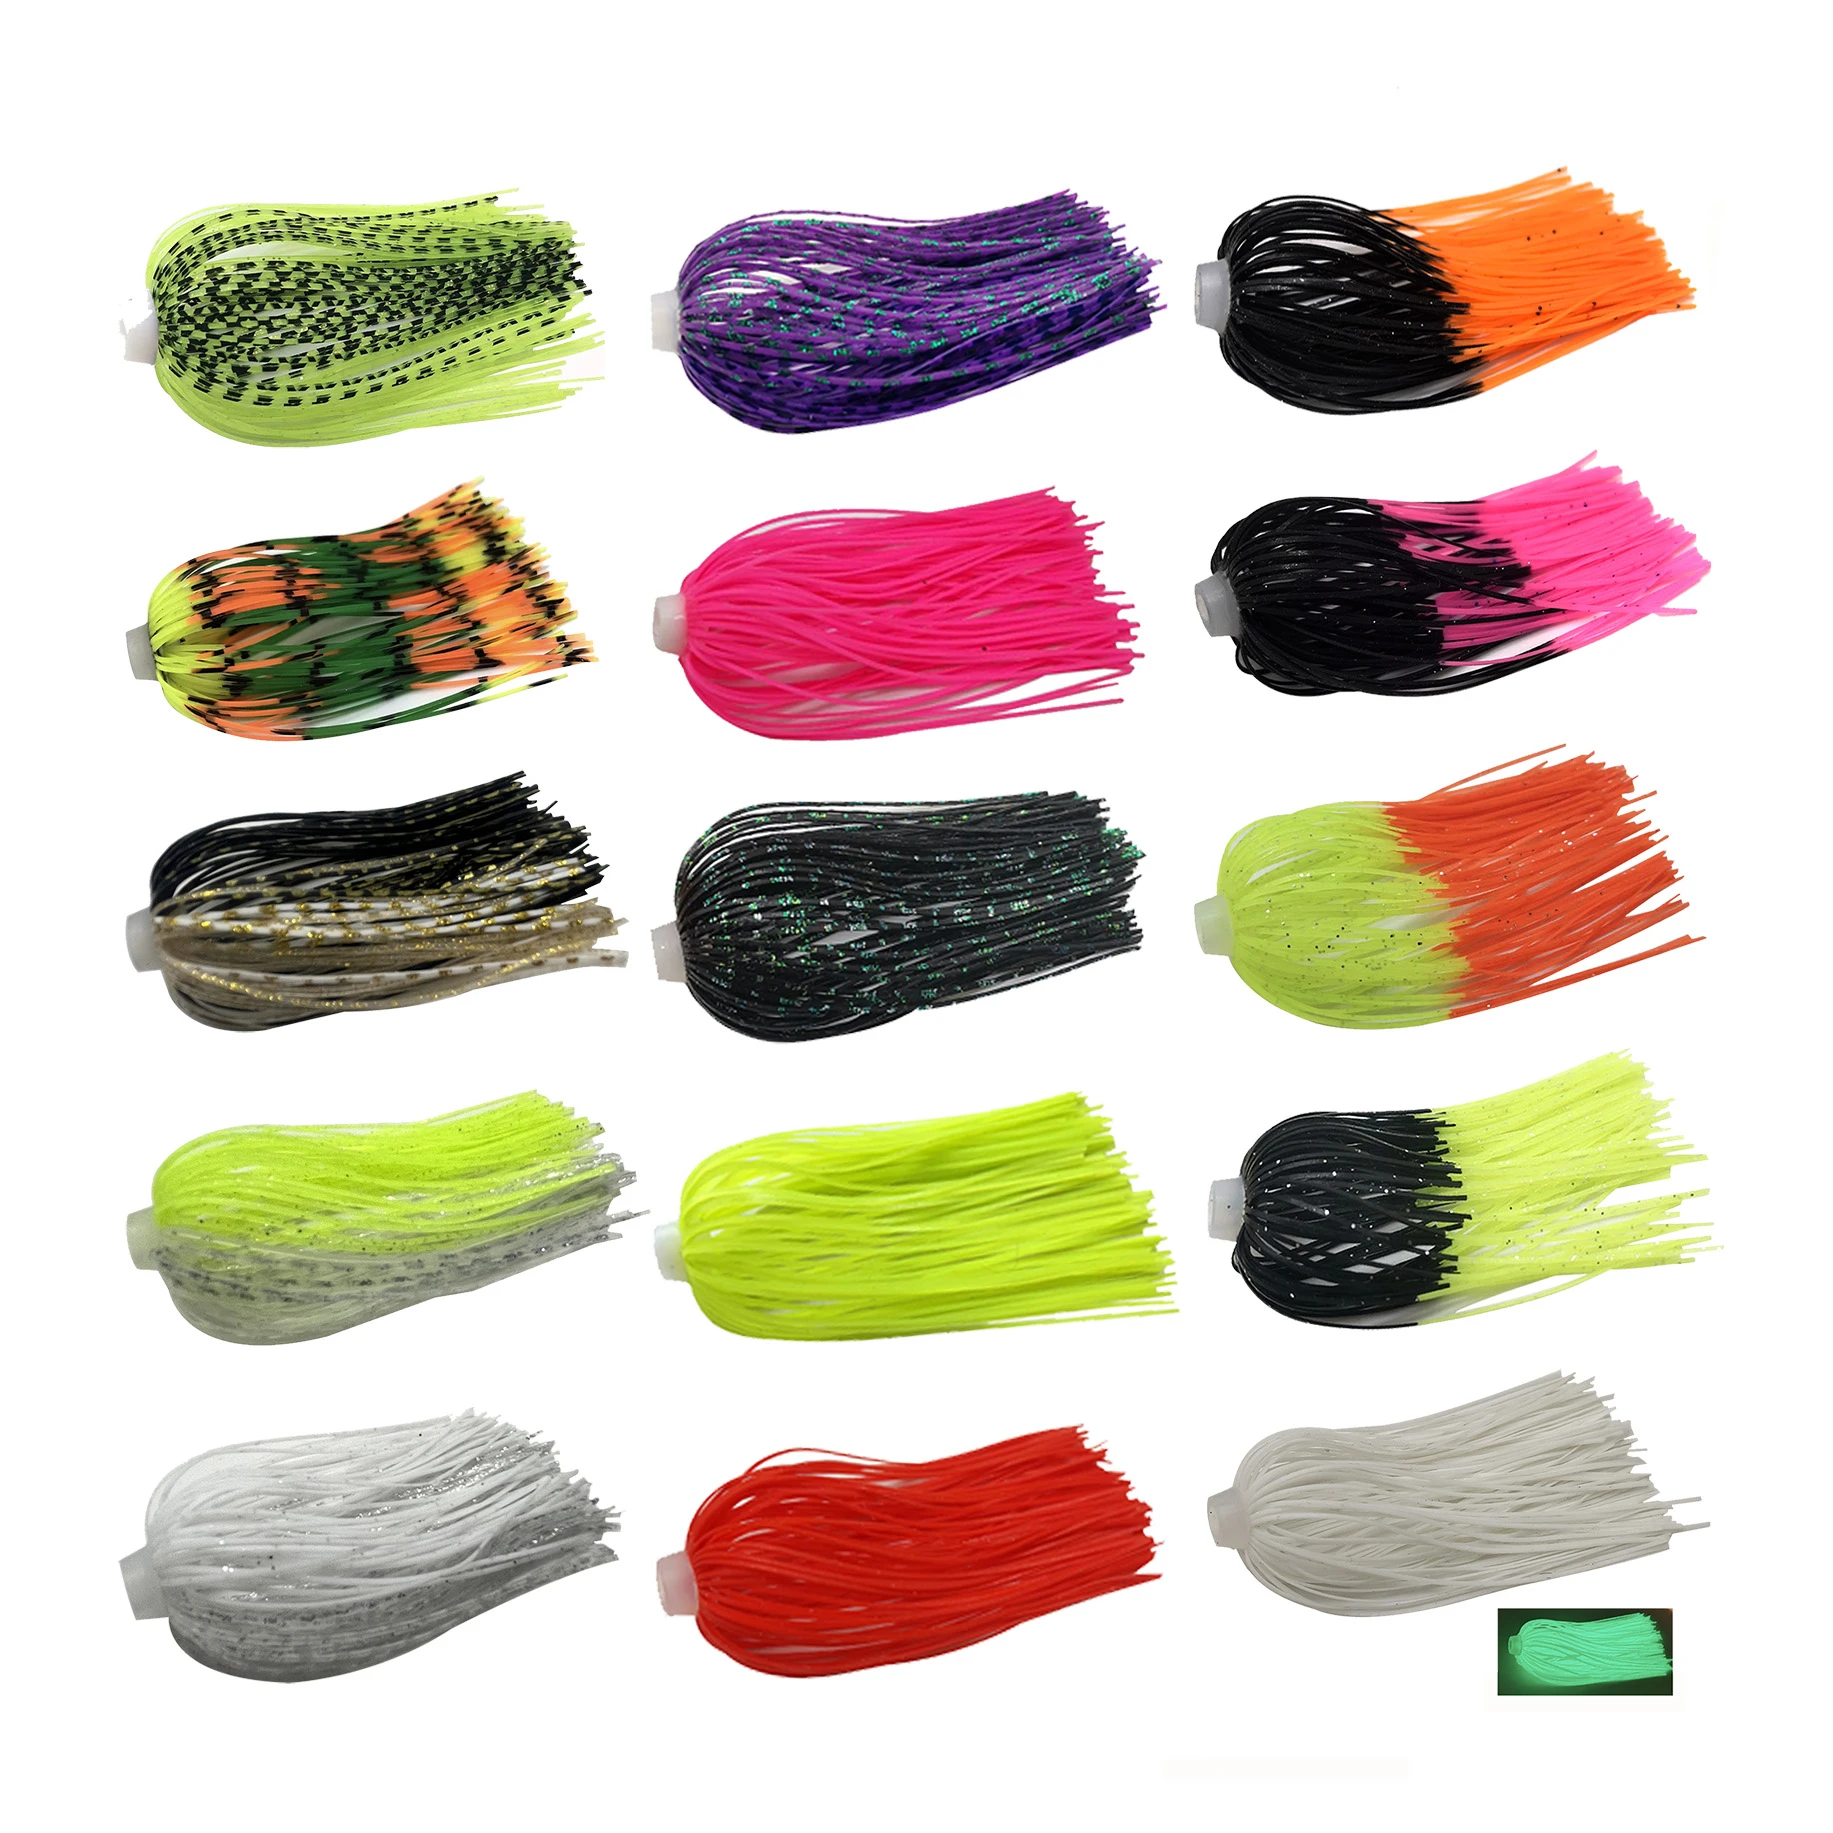 5 pcs/lot 88 Strands 70mm Silicone Skirts Elastic hole Umbrella skirts Fishing Accessories Buzzbaits Spinner Buzz Bait